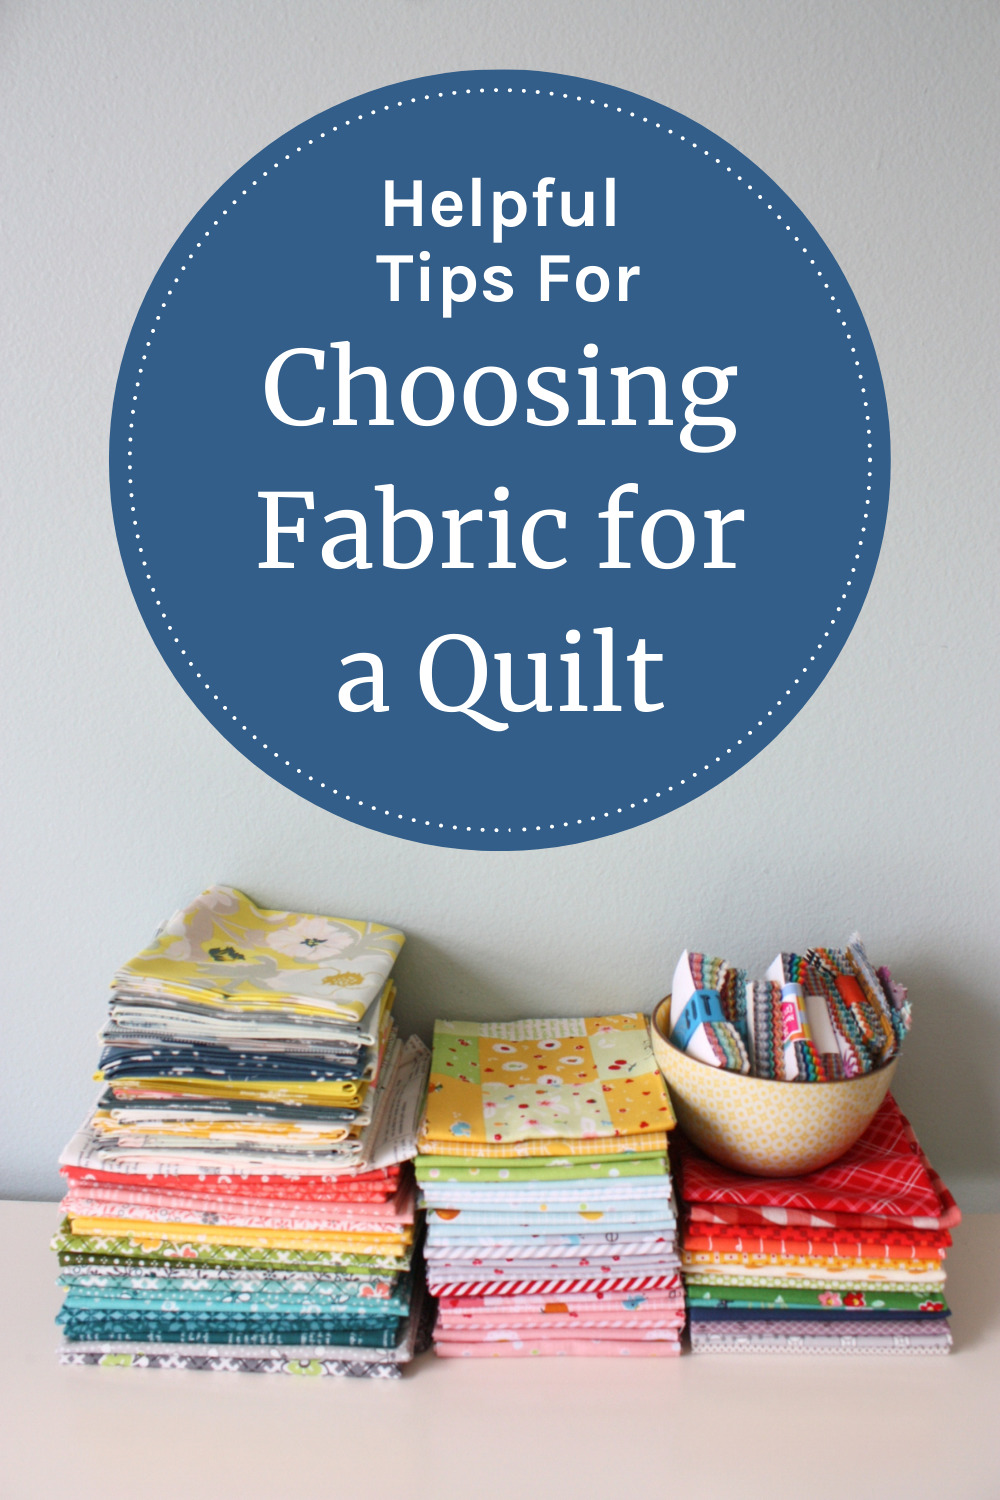 Tips for Choosing Fabric for a Quilt